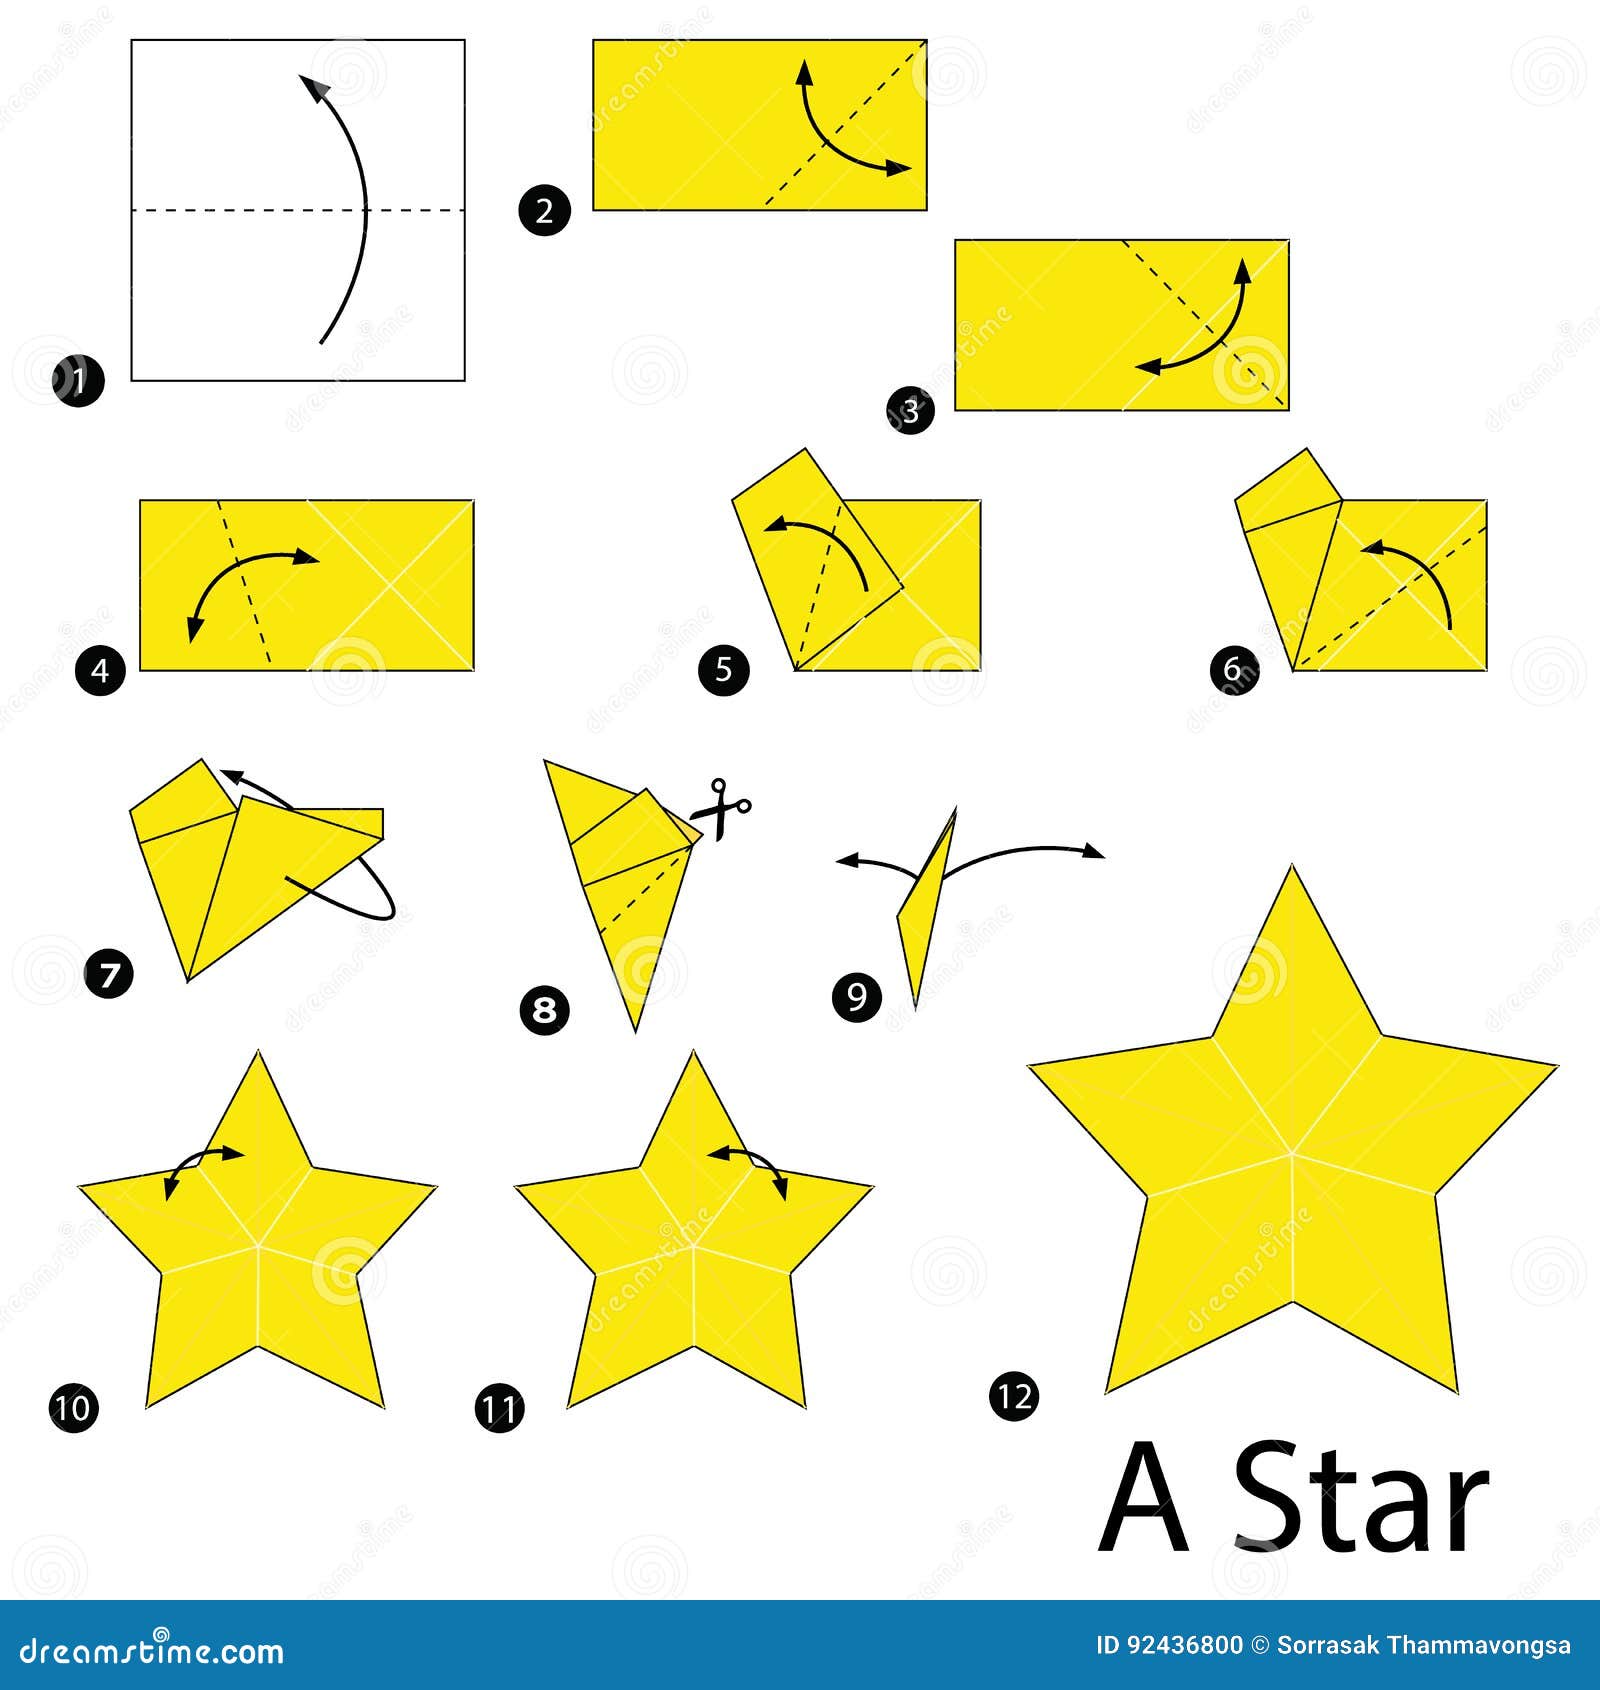 How to Buy a Star: 10 Steps (with Pictures) - wikiHow Life